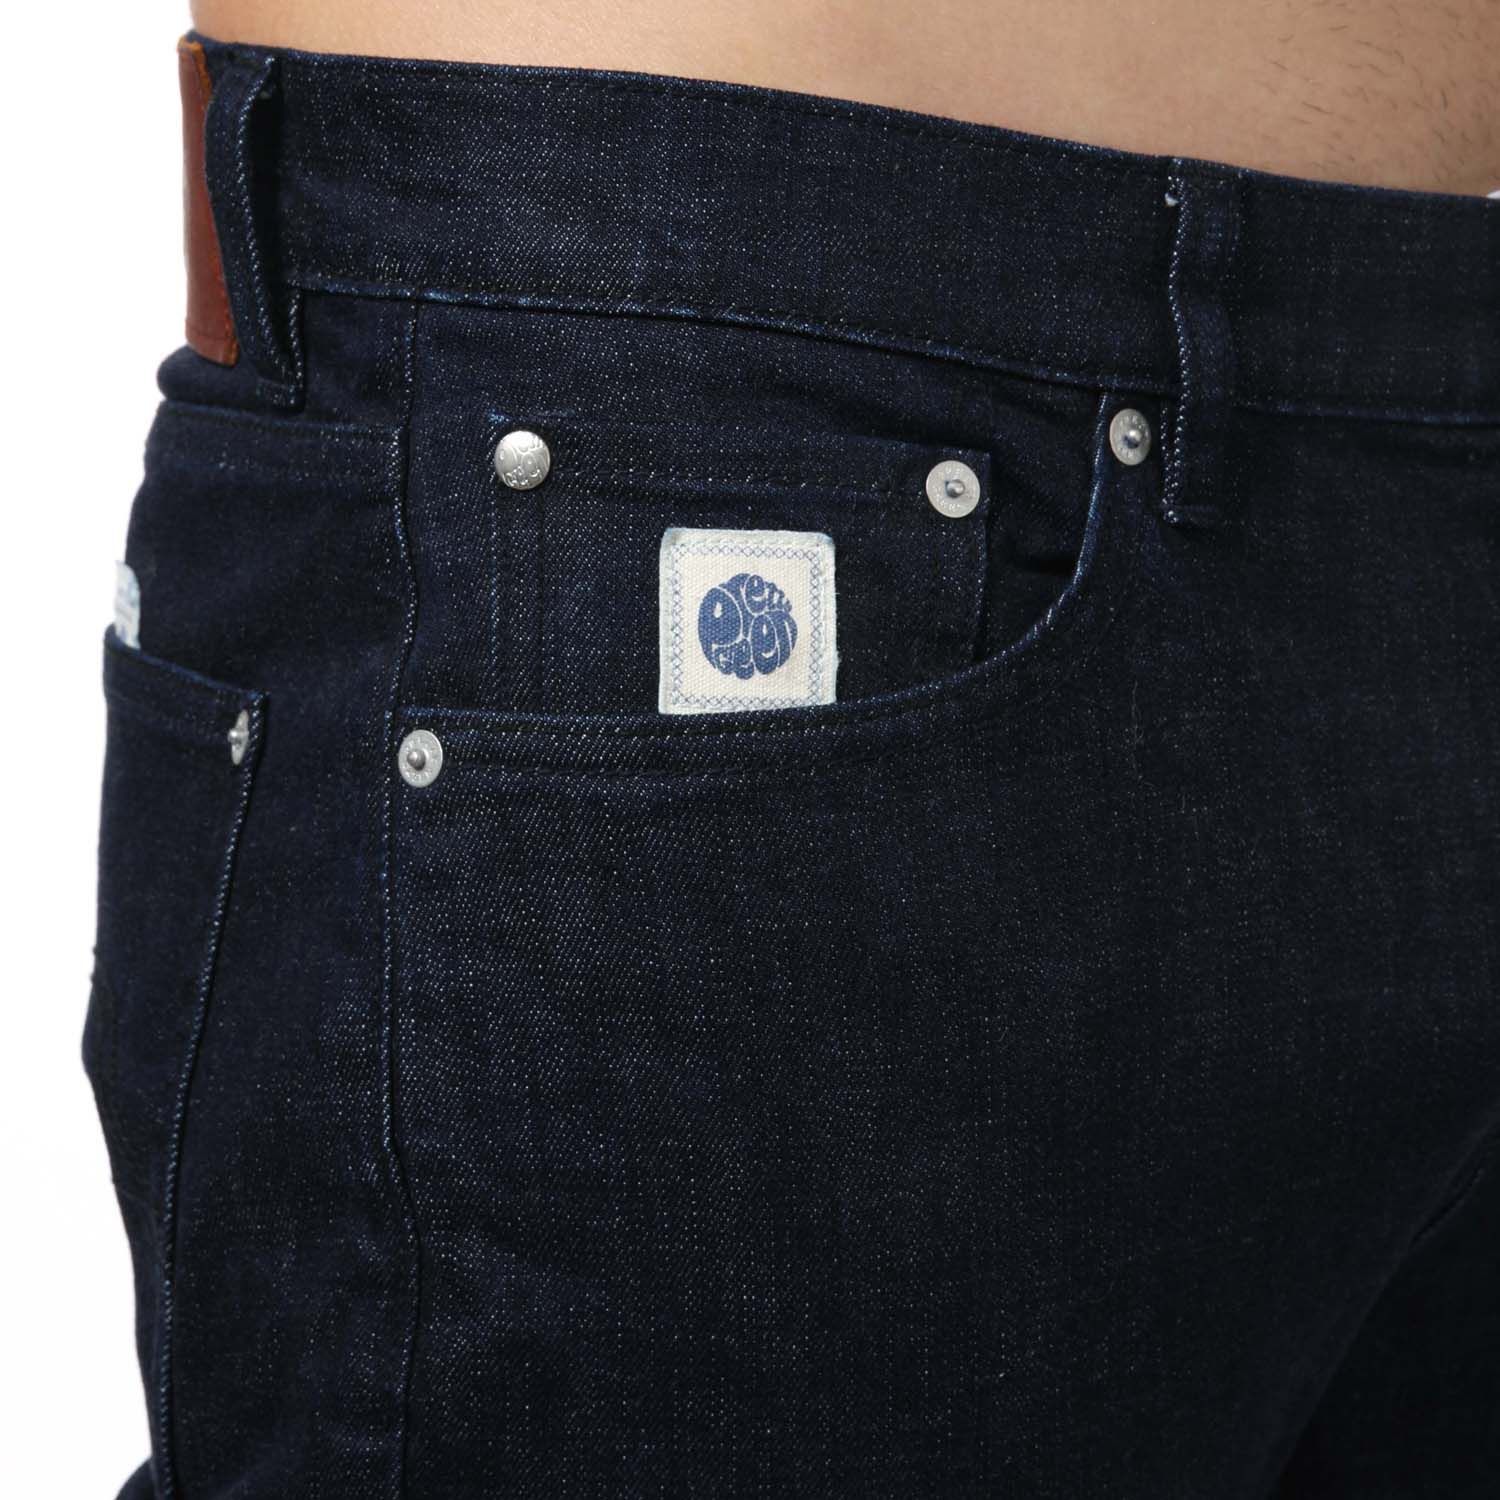 Mens Pretty Green Erwood Slim Fit Jeans in navy.- 5-pocket construction. - Concealed button fly closure.- Twin needle stitching.- Woven logo label at front waist band.- Branded arcuate at front coin pocket.- Embossed rivets and metal trims.- Hem chain stitch detail.- Complete with a branded leather patch.- Slim fit.- 99% Cotton  1% Polyurethane.- Ref: G21Q3MULEG598N